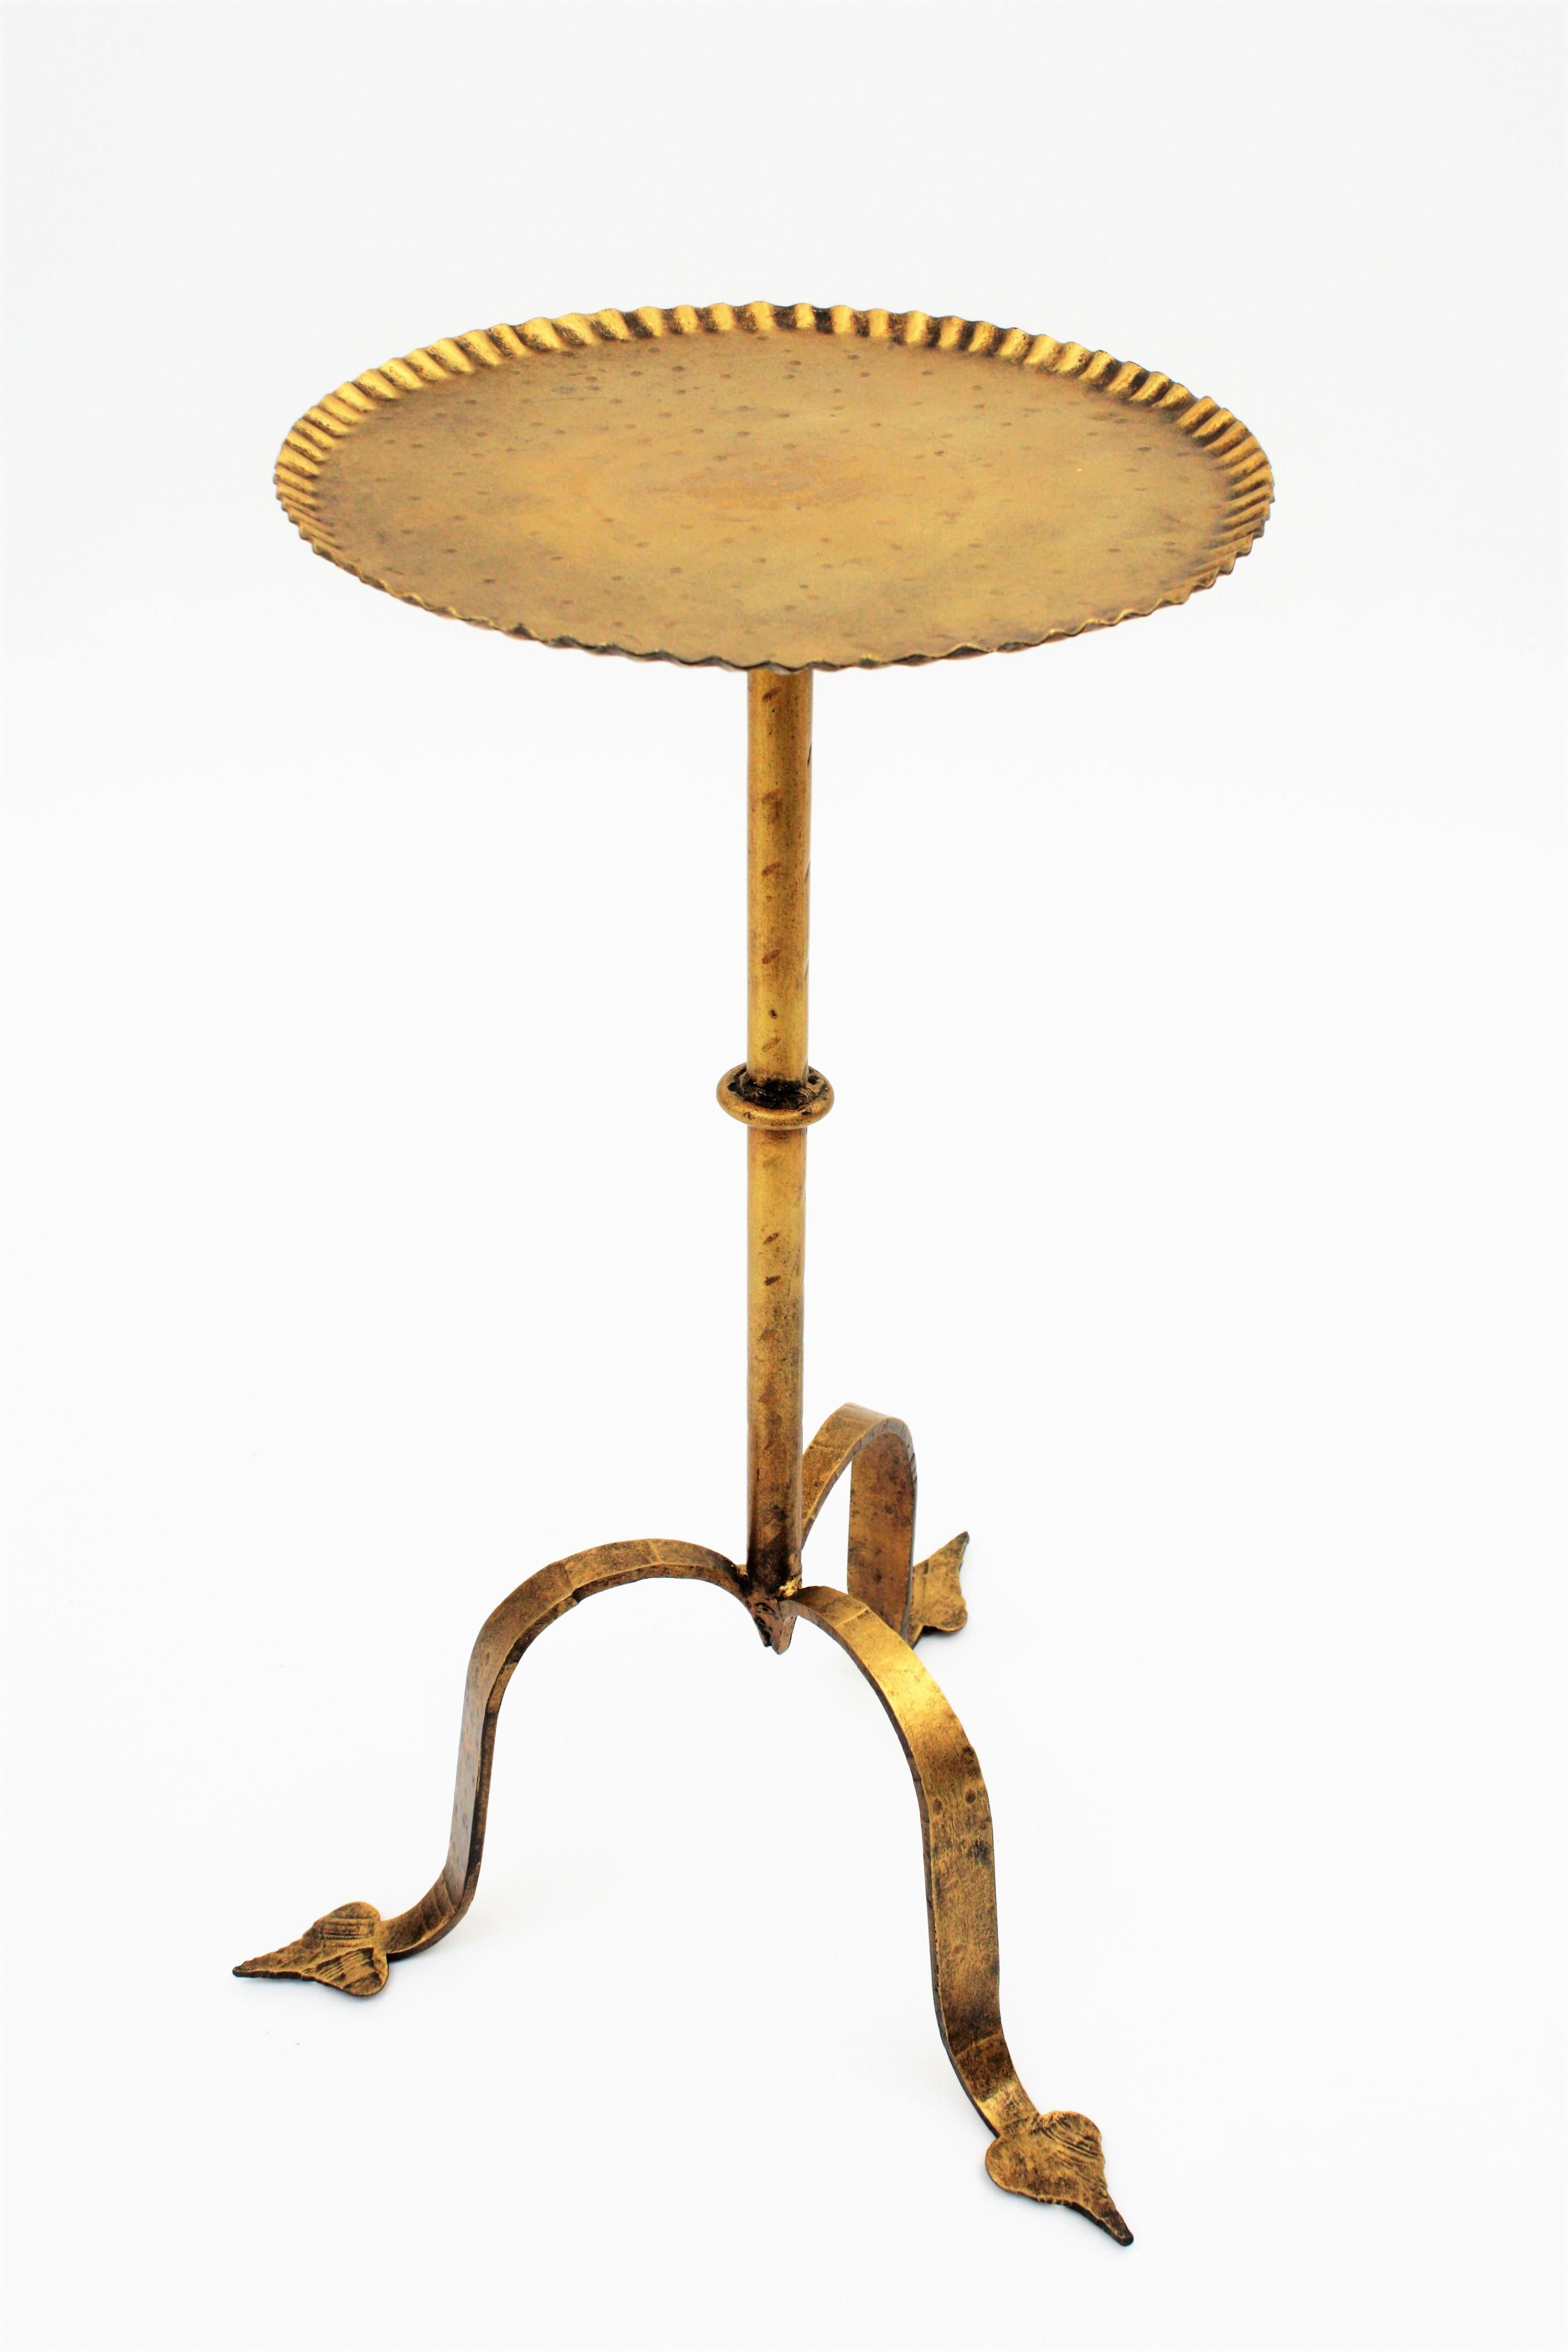 20th Century Spanish Gilt Iron Drinks Table Gueridon Side Table or Stand with Scalloped Rim